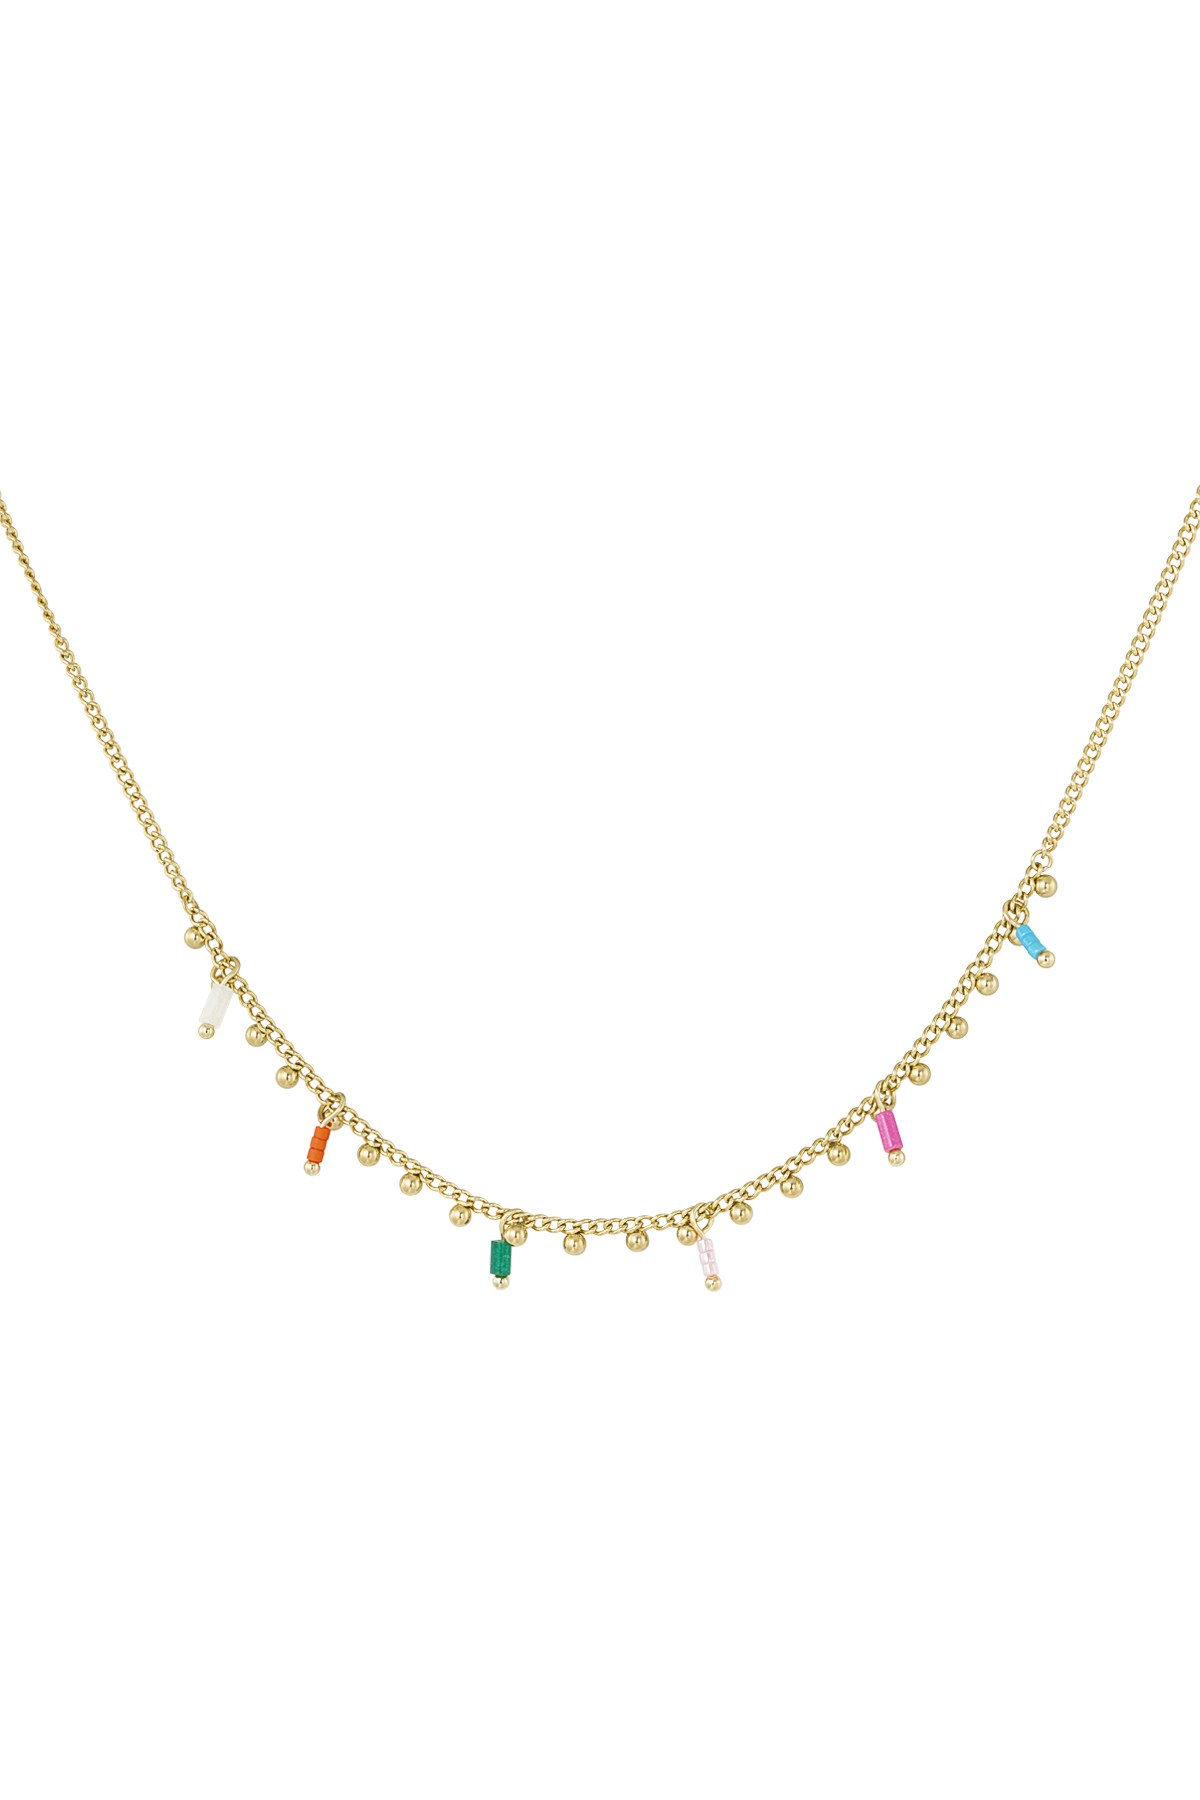 Bedelketting messy colors - gold h5 